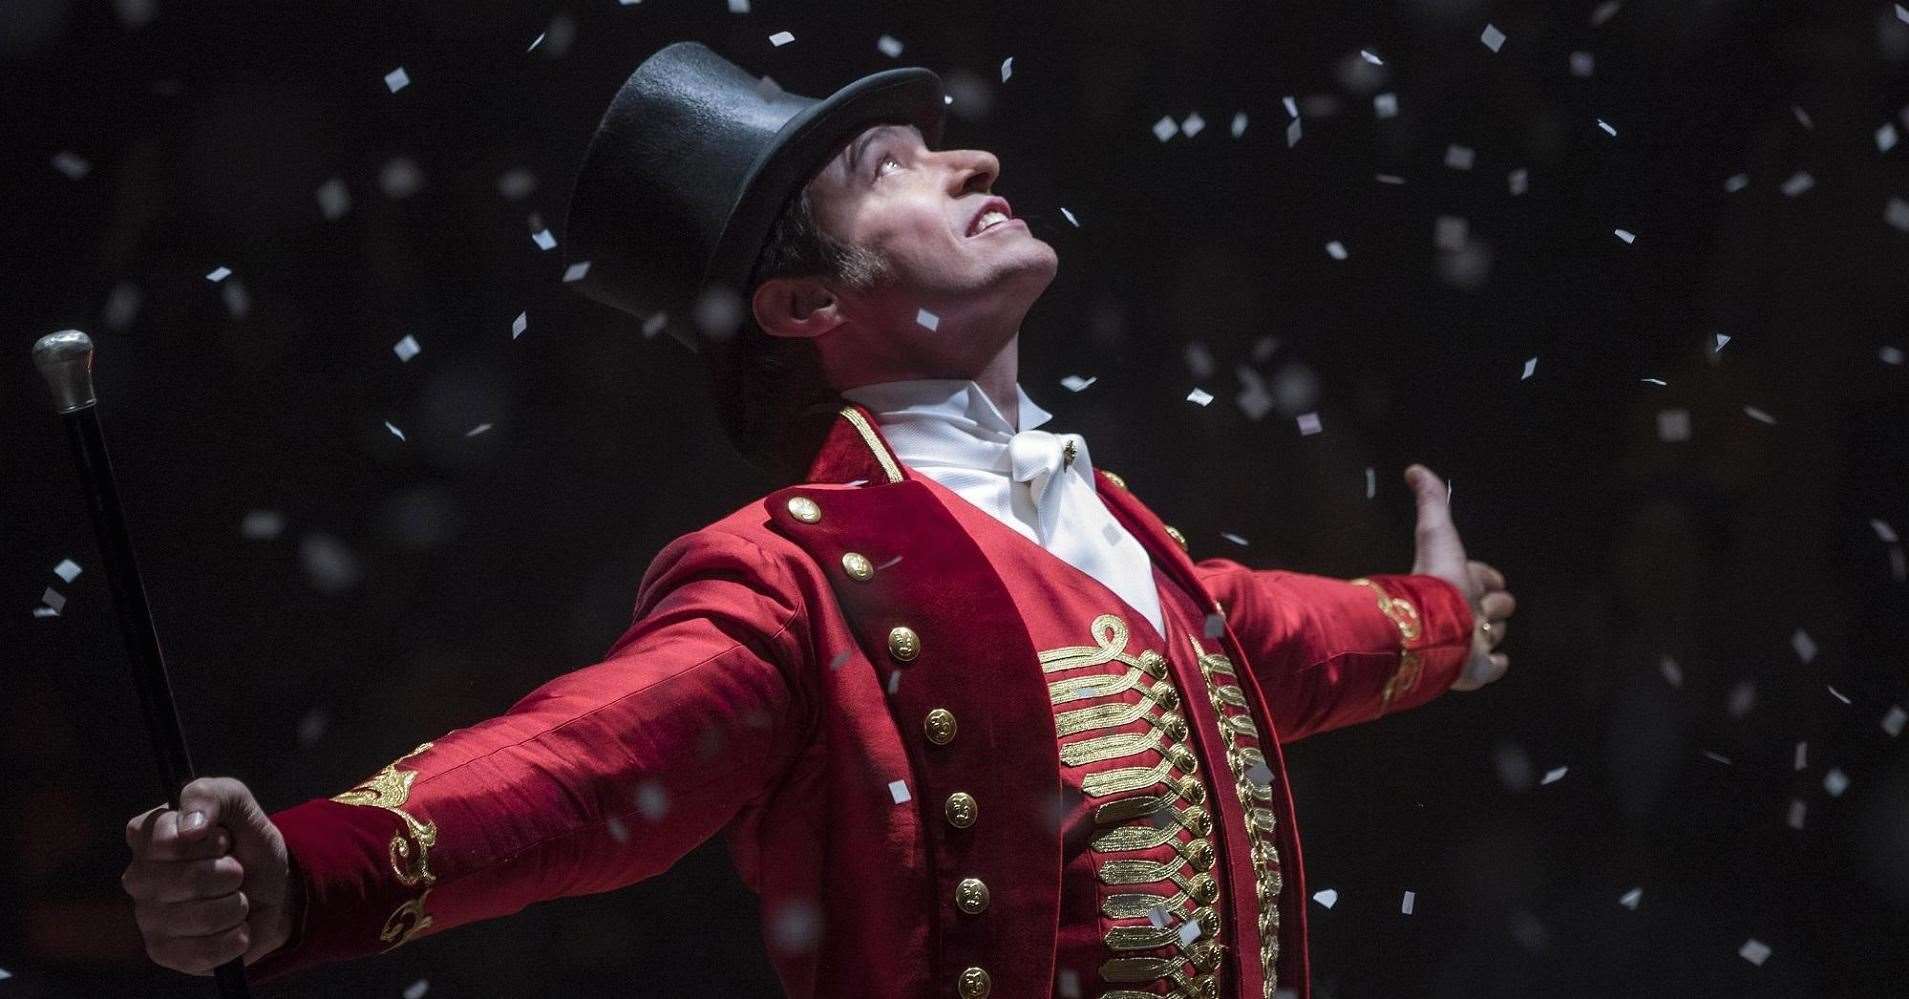 The Greatest Showman will be screened at Whatman Park